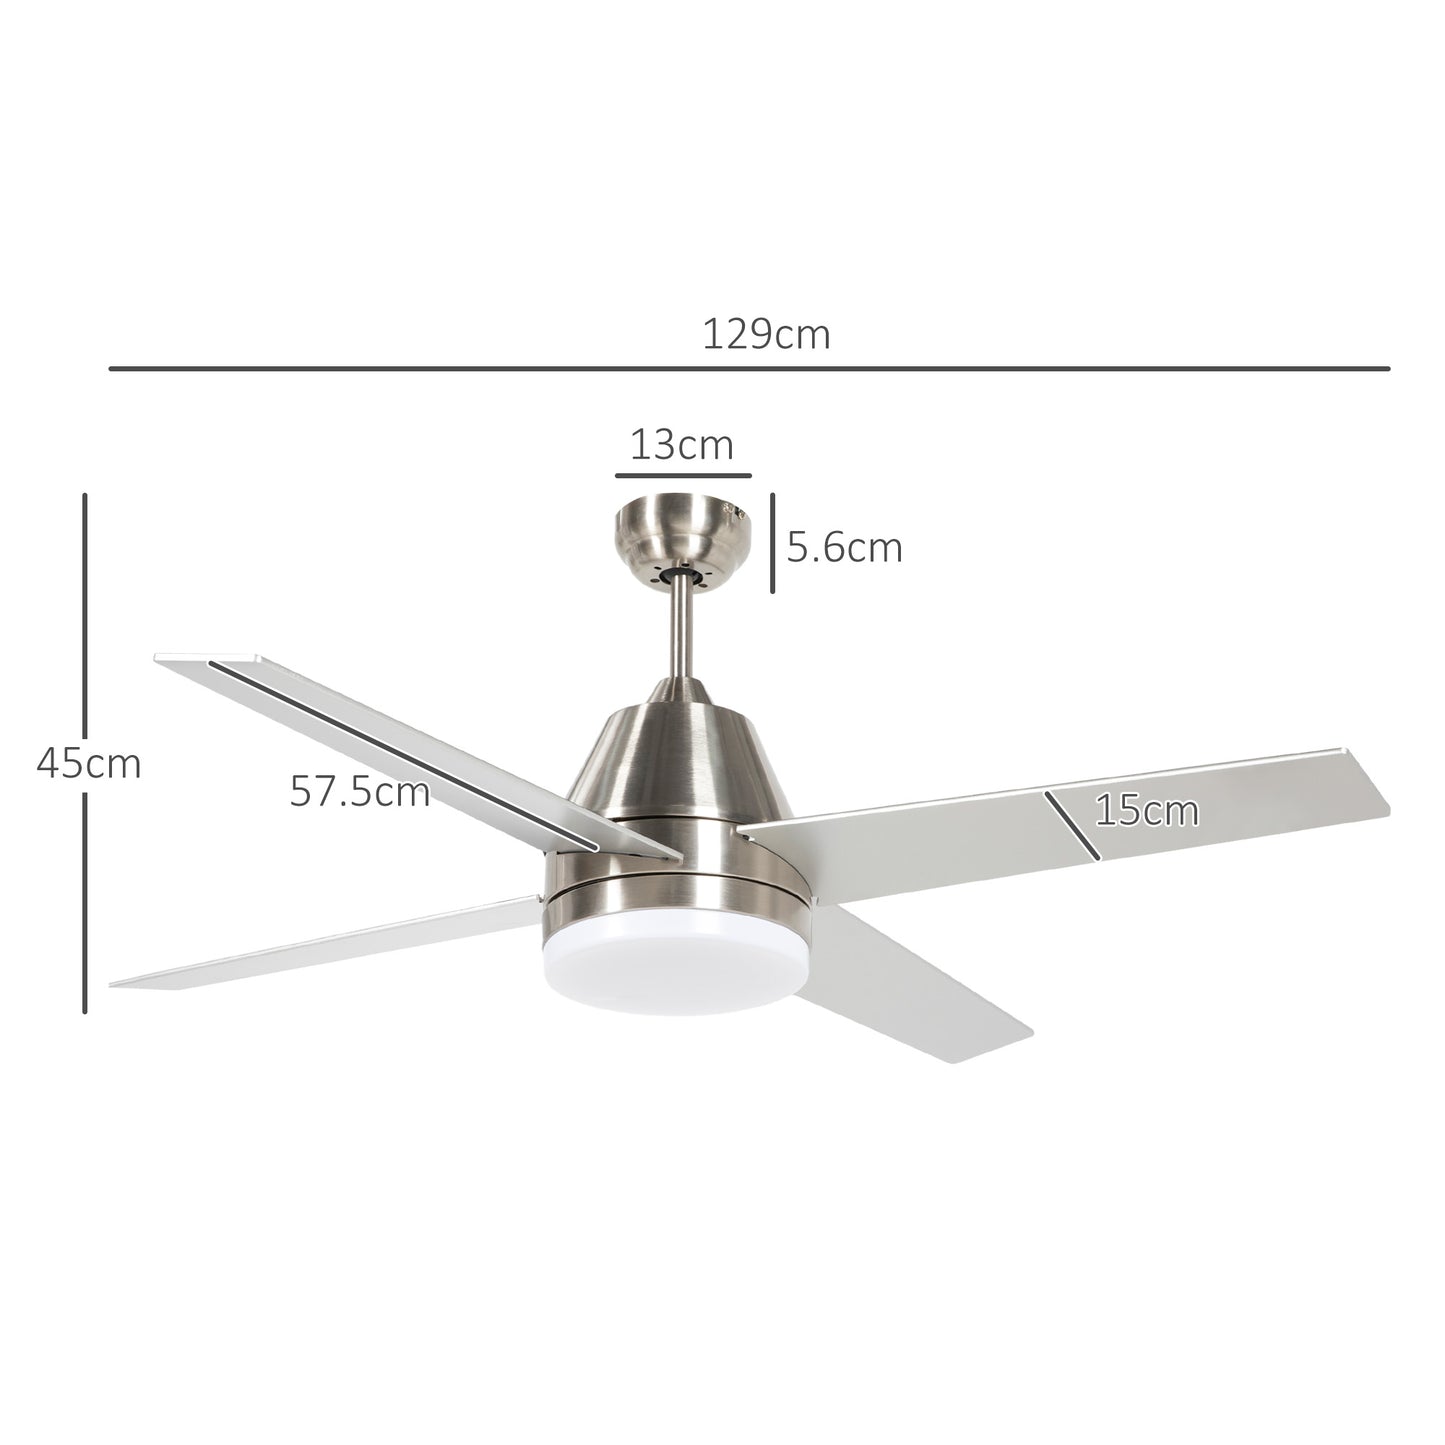 HOMCOM Ceiling Fan with LED Light Flush Mount Ceiling Fan Lights with Reversible Blades Remote Silver and Black